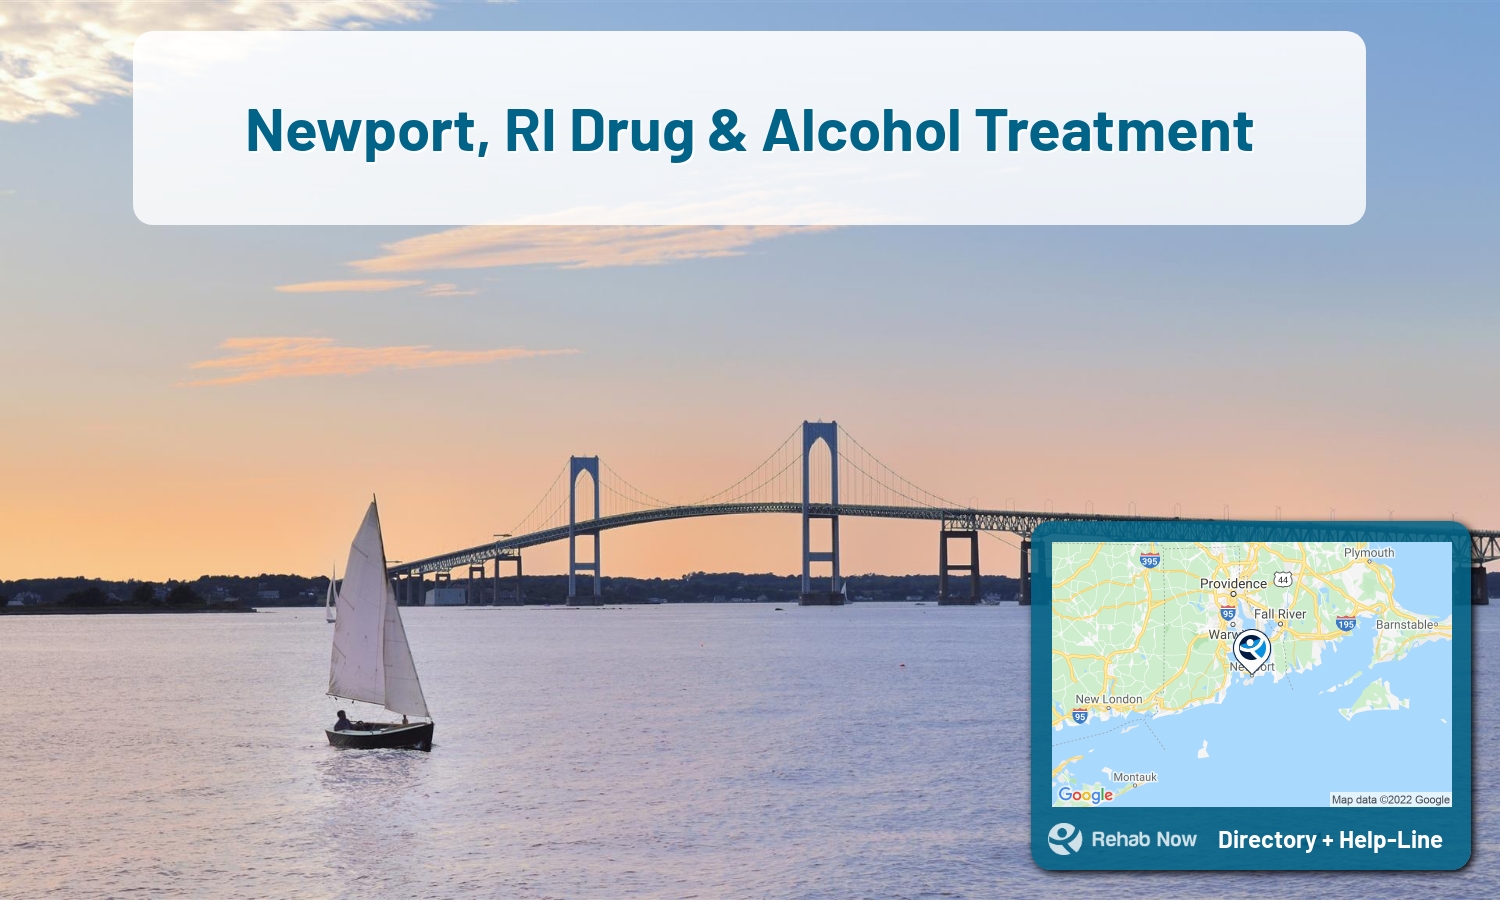 View options, availability, treatment methods, and more, for drug rehab and alcohol treatment in Newport, Rhode Island